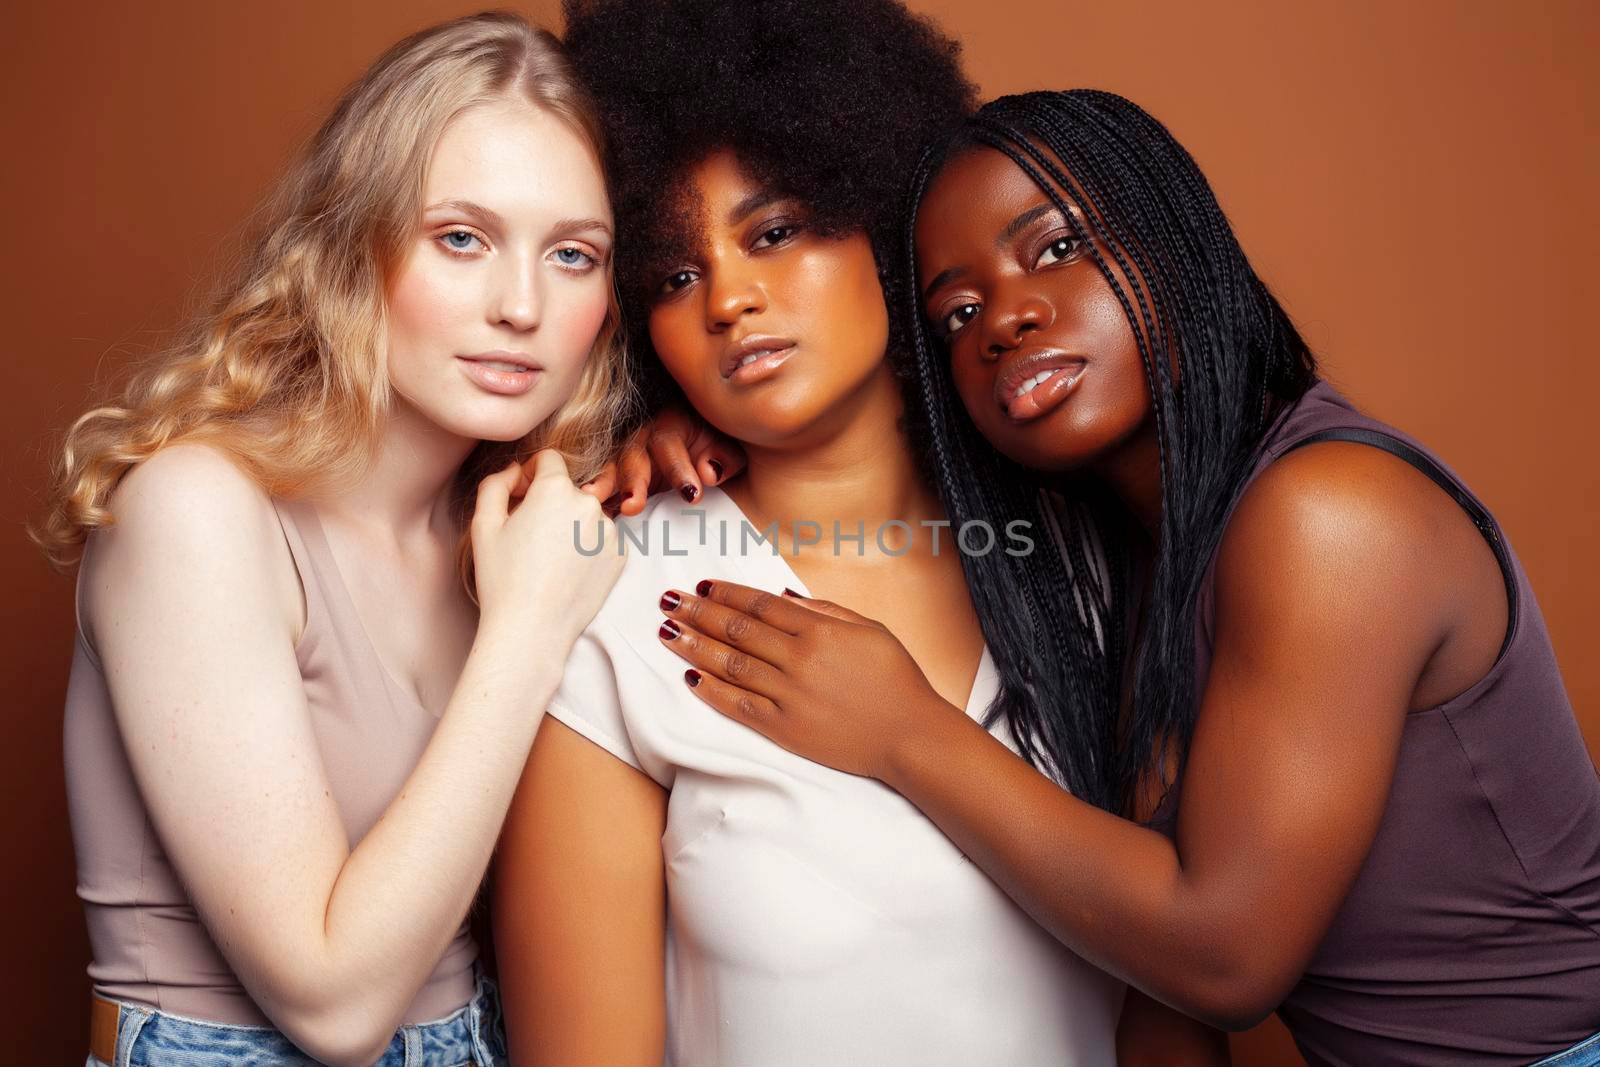 young pretty caucasian, afro, scandinavian woman posing cheerful together on brown background, lifestyle diverse nationality people concept close up